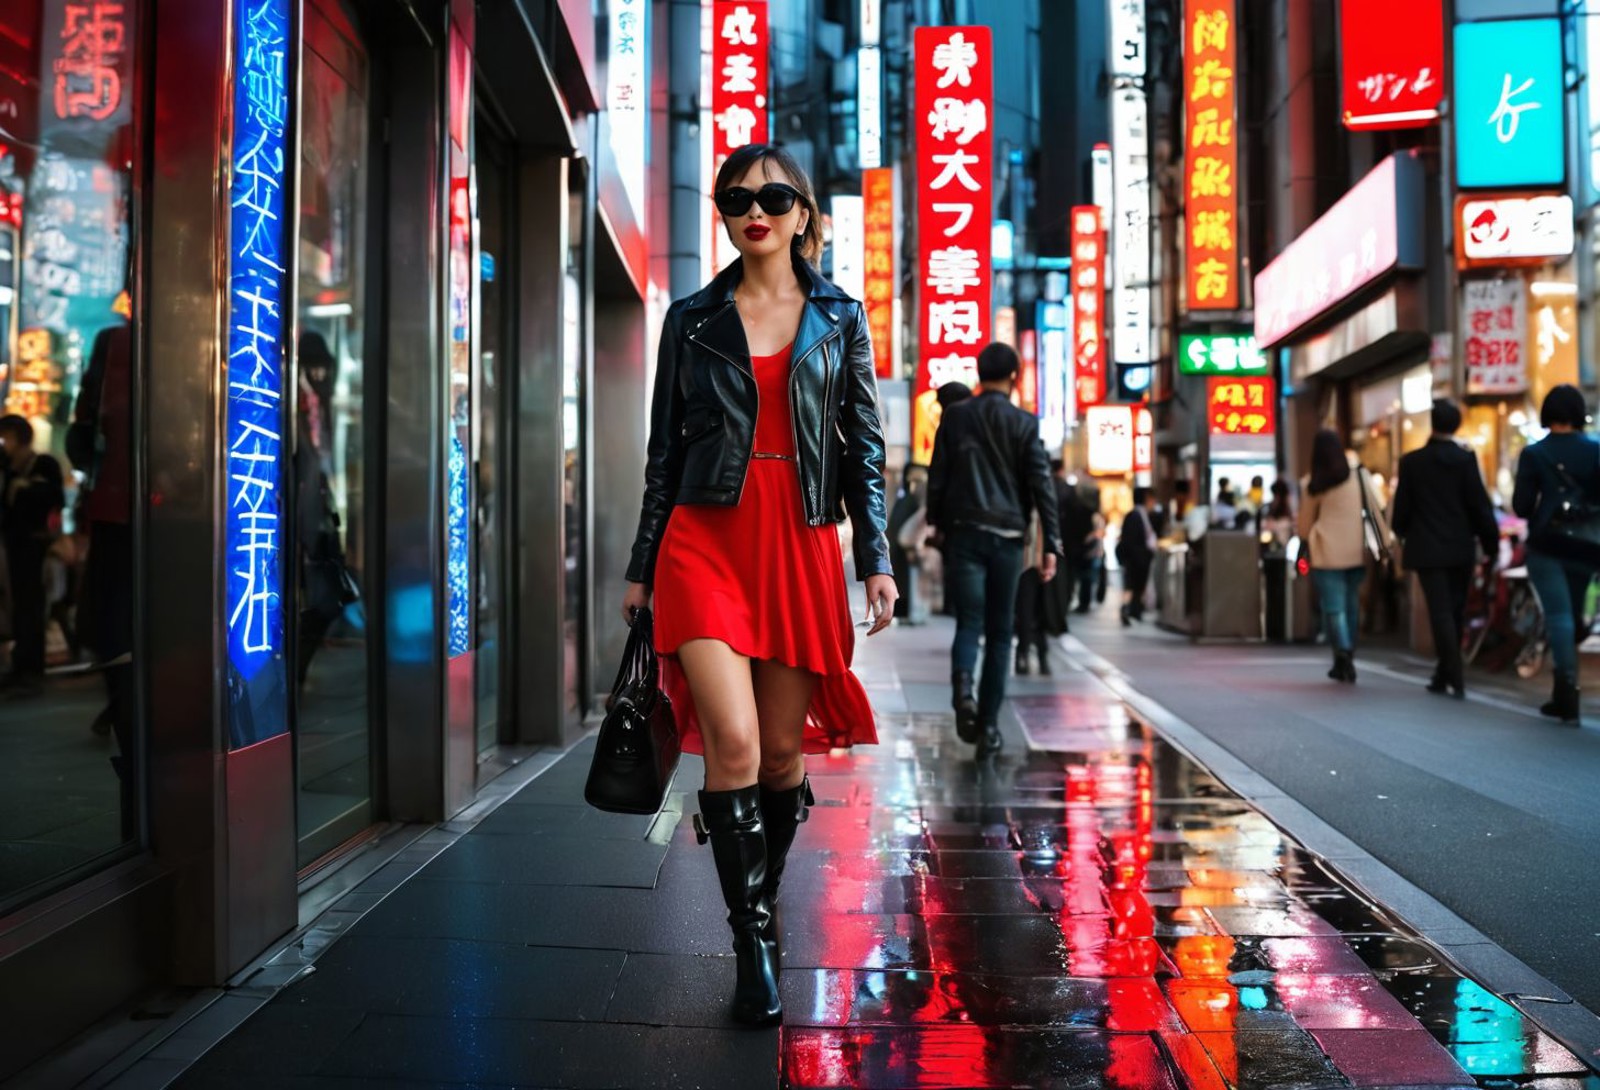 Half body shot, A stylish woman walks down a Tokyo street filled with warm glowing neon and animated city signage. She wea...